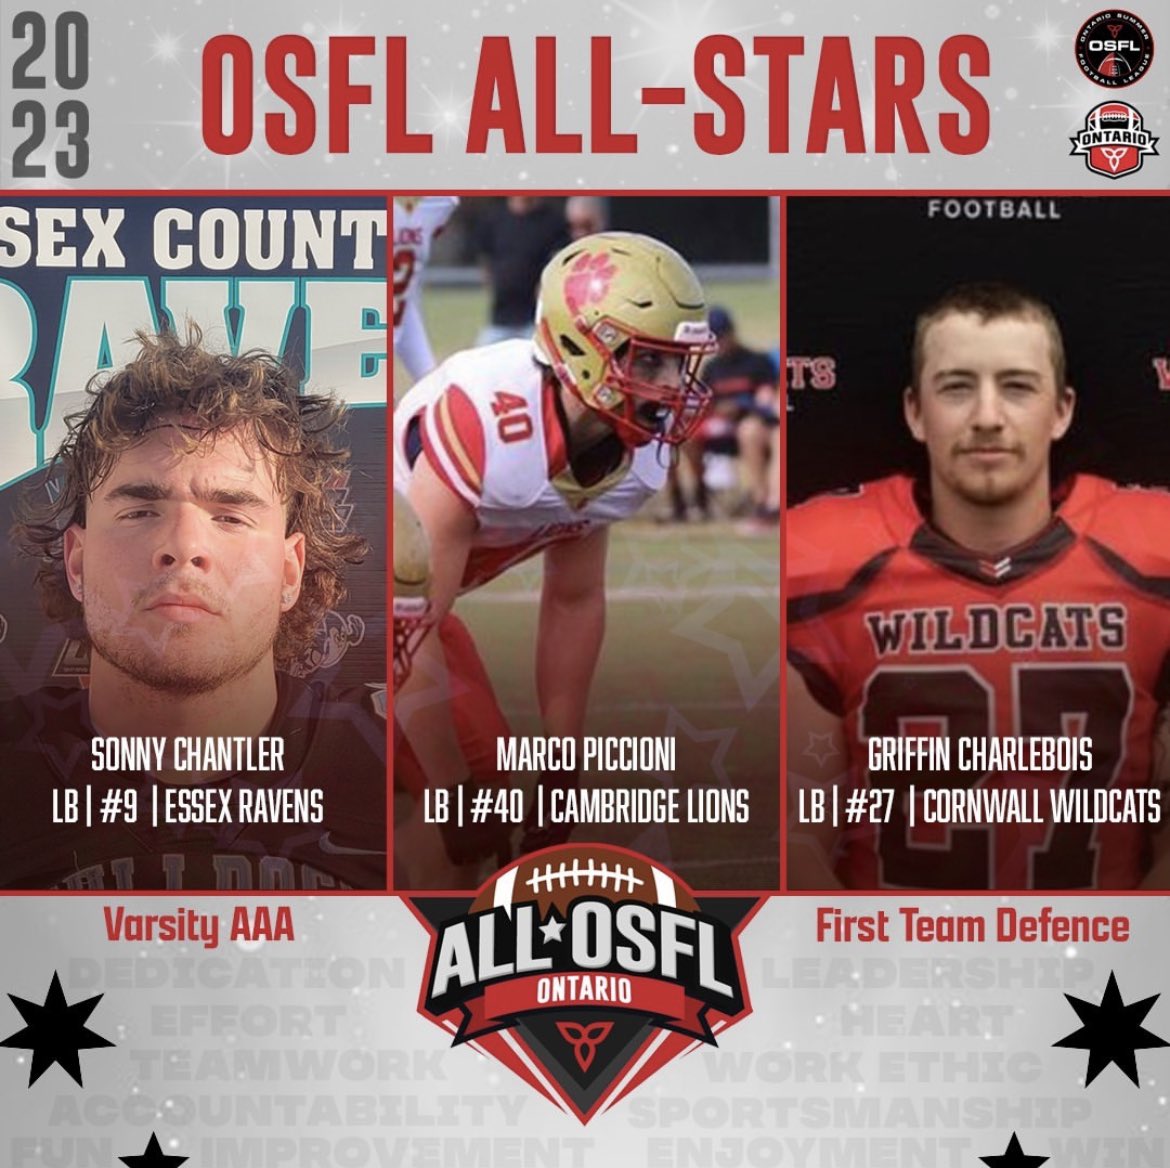 Blessed to have been chosen as a First Team U18 AAA @OSFL_Official All Star Linebacker. Thank you to my coaching staff for the nomination as well as the league for this honour!